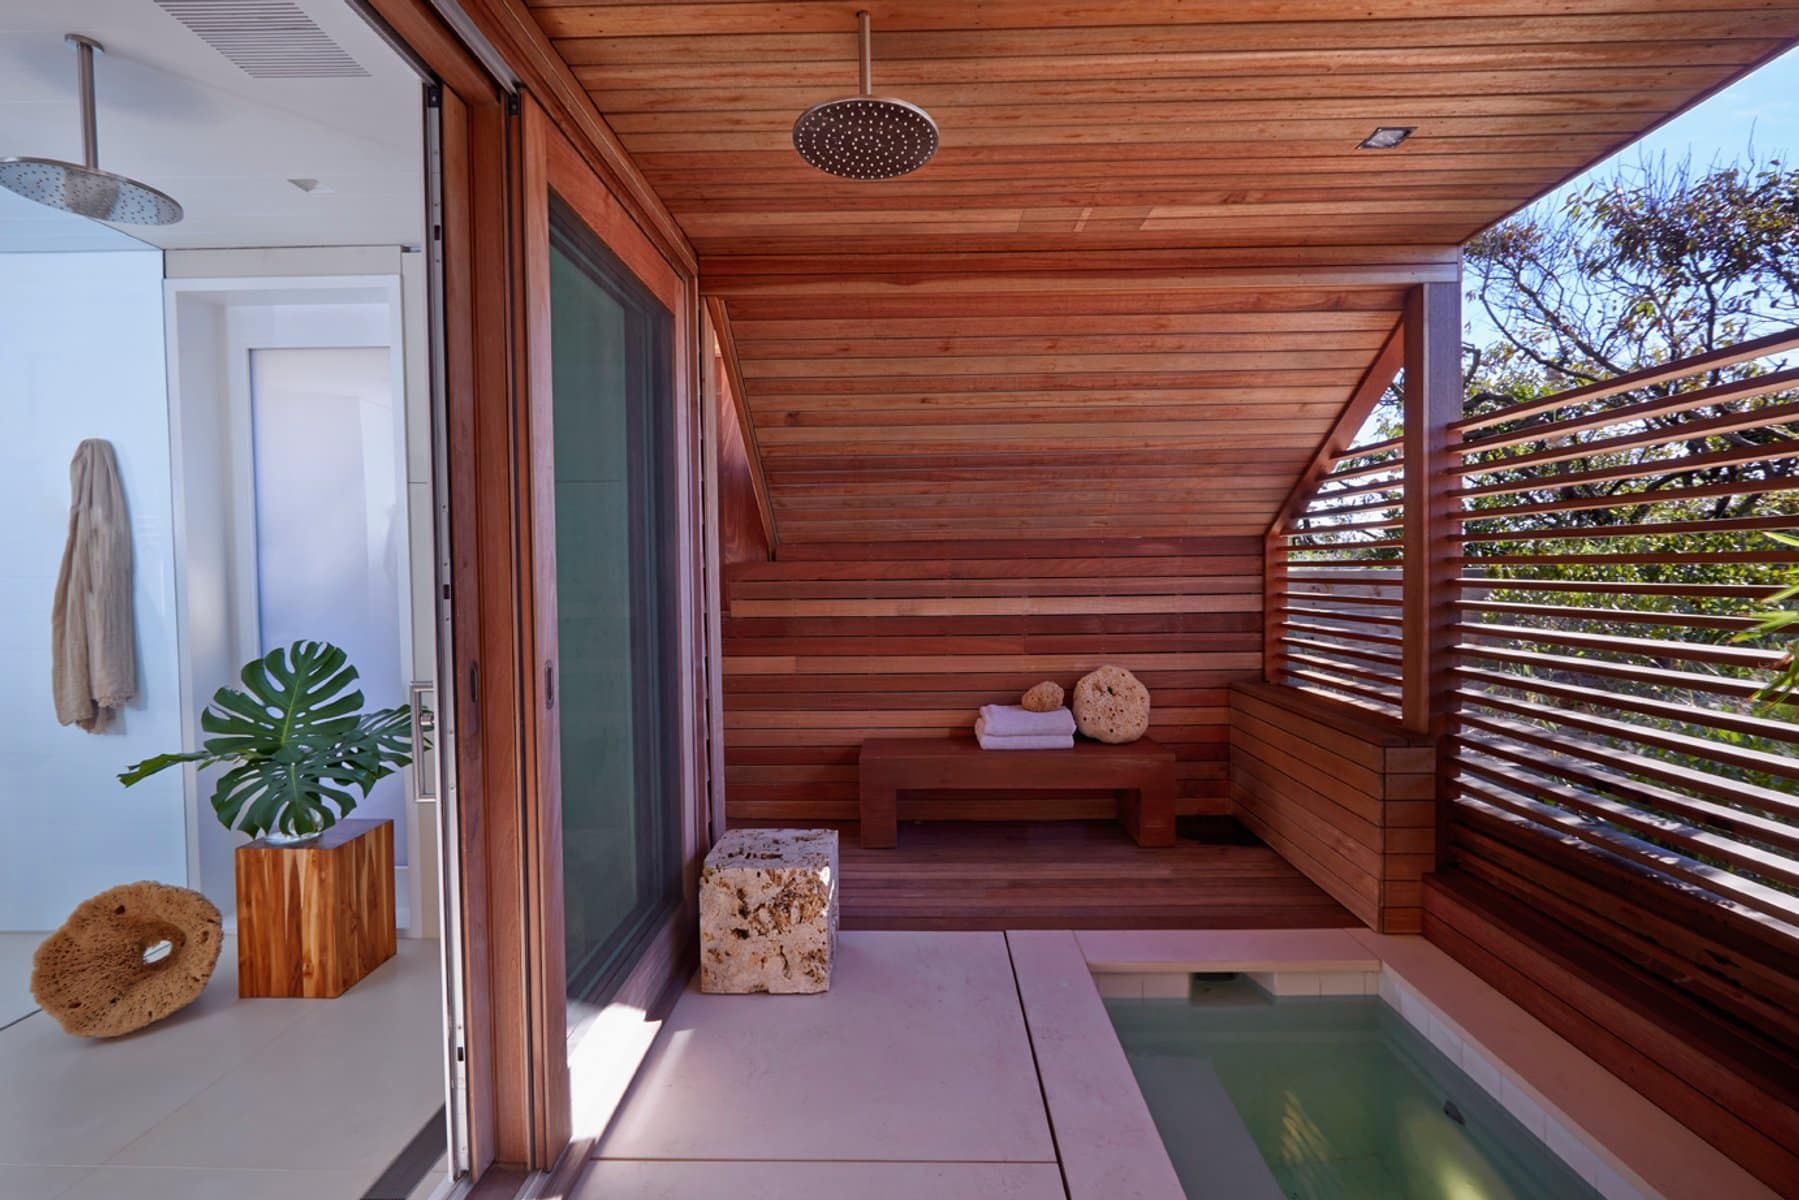 These Outdoor Showers Will Make You Want to Bathe Alfresco